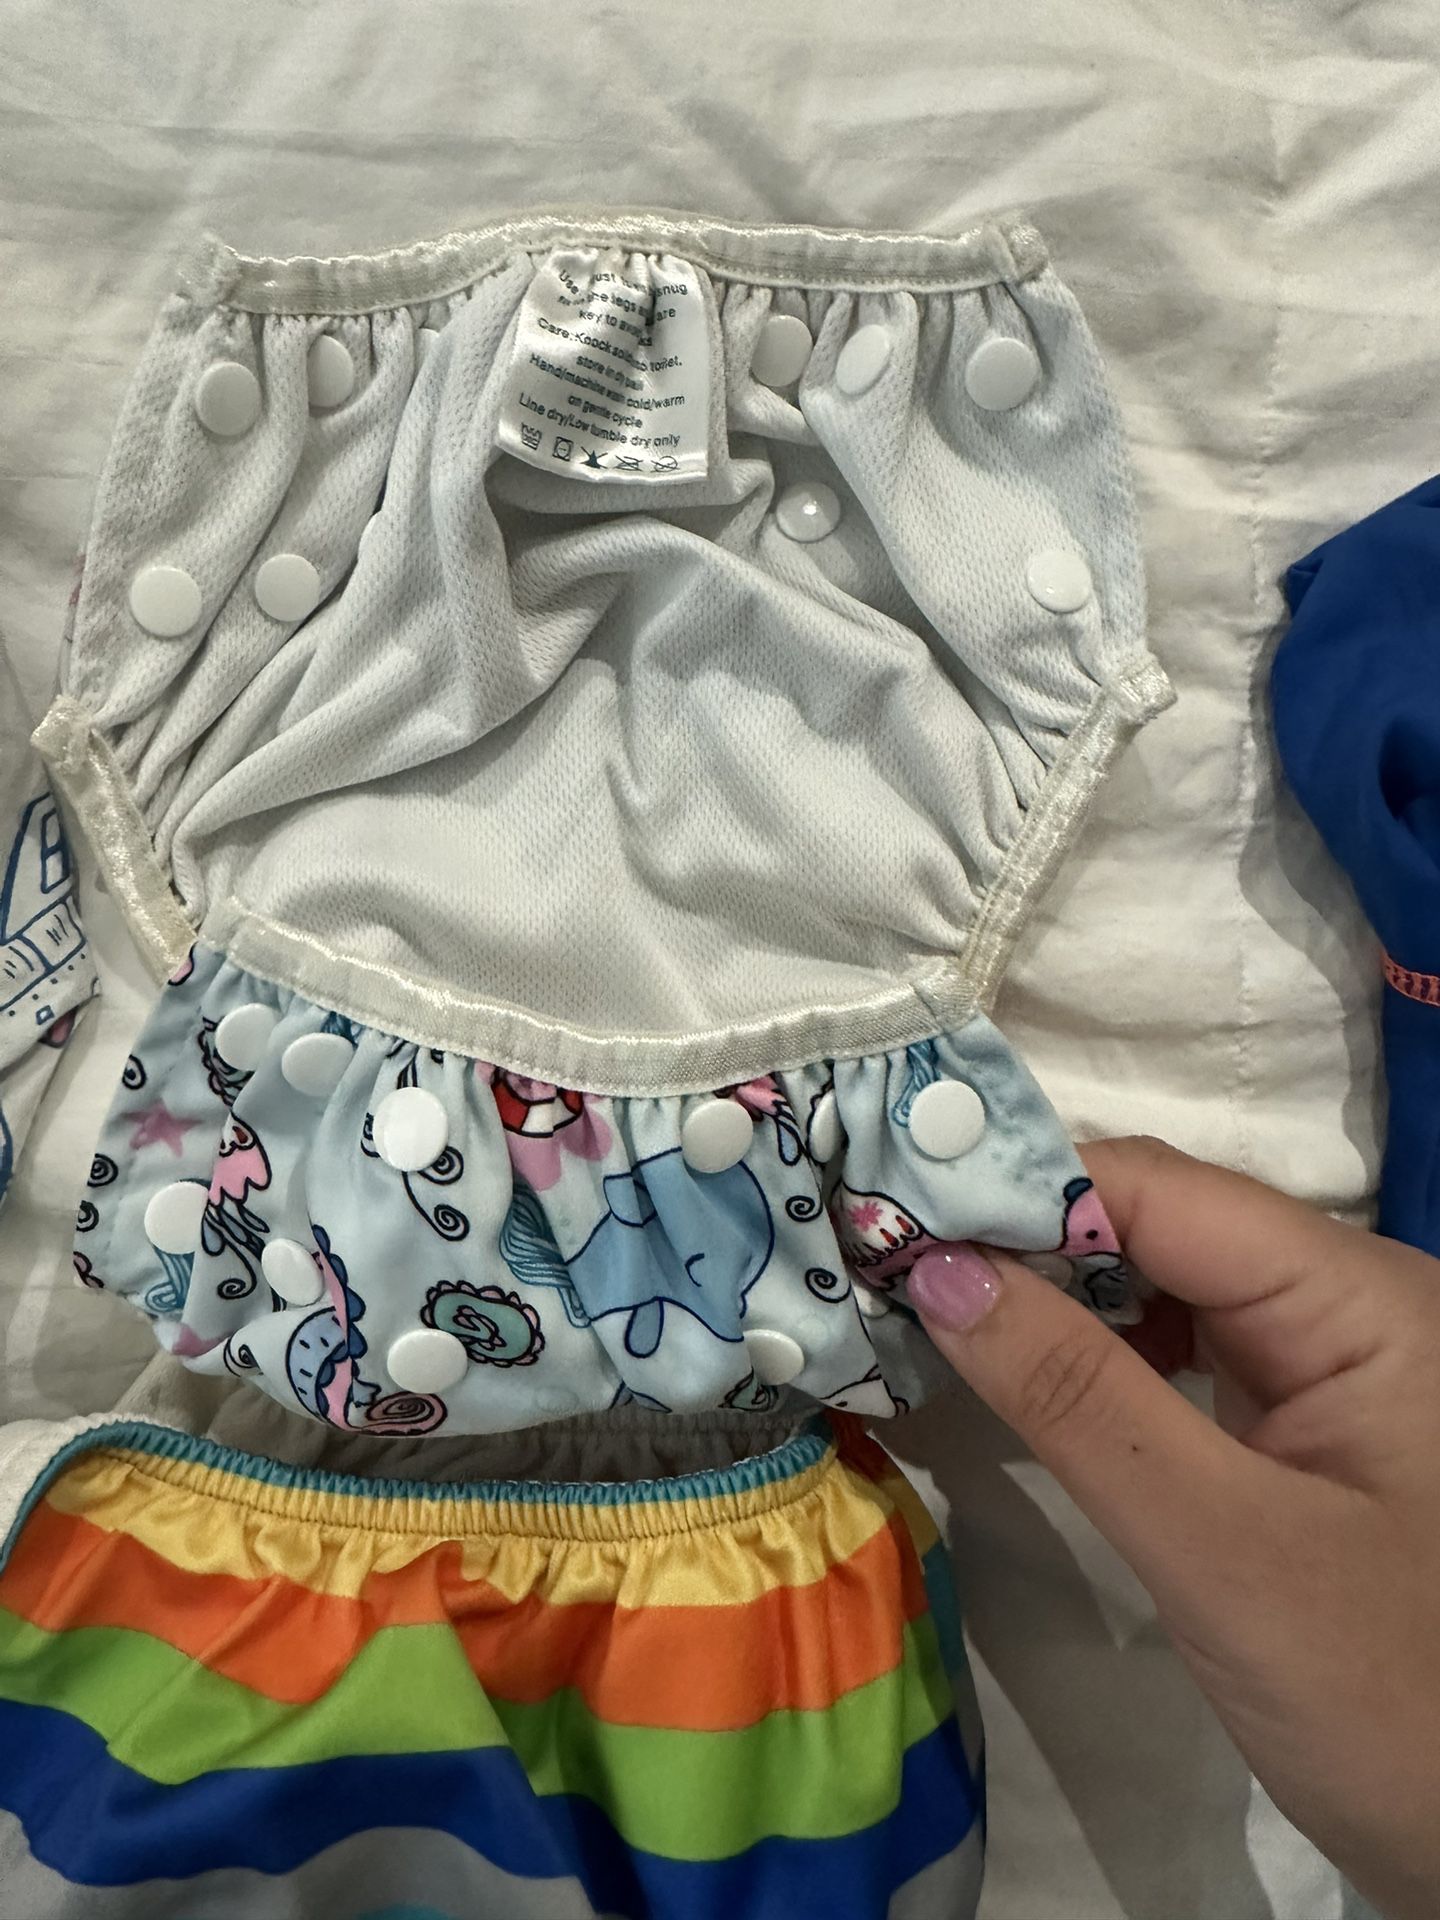 Two Swim Diapers